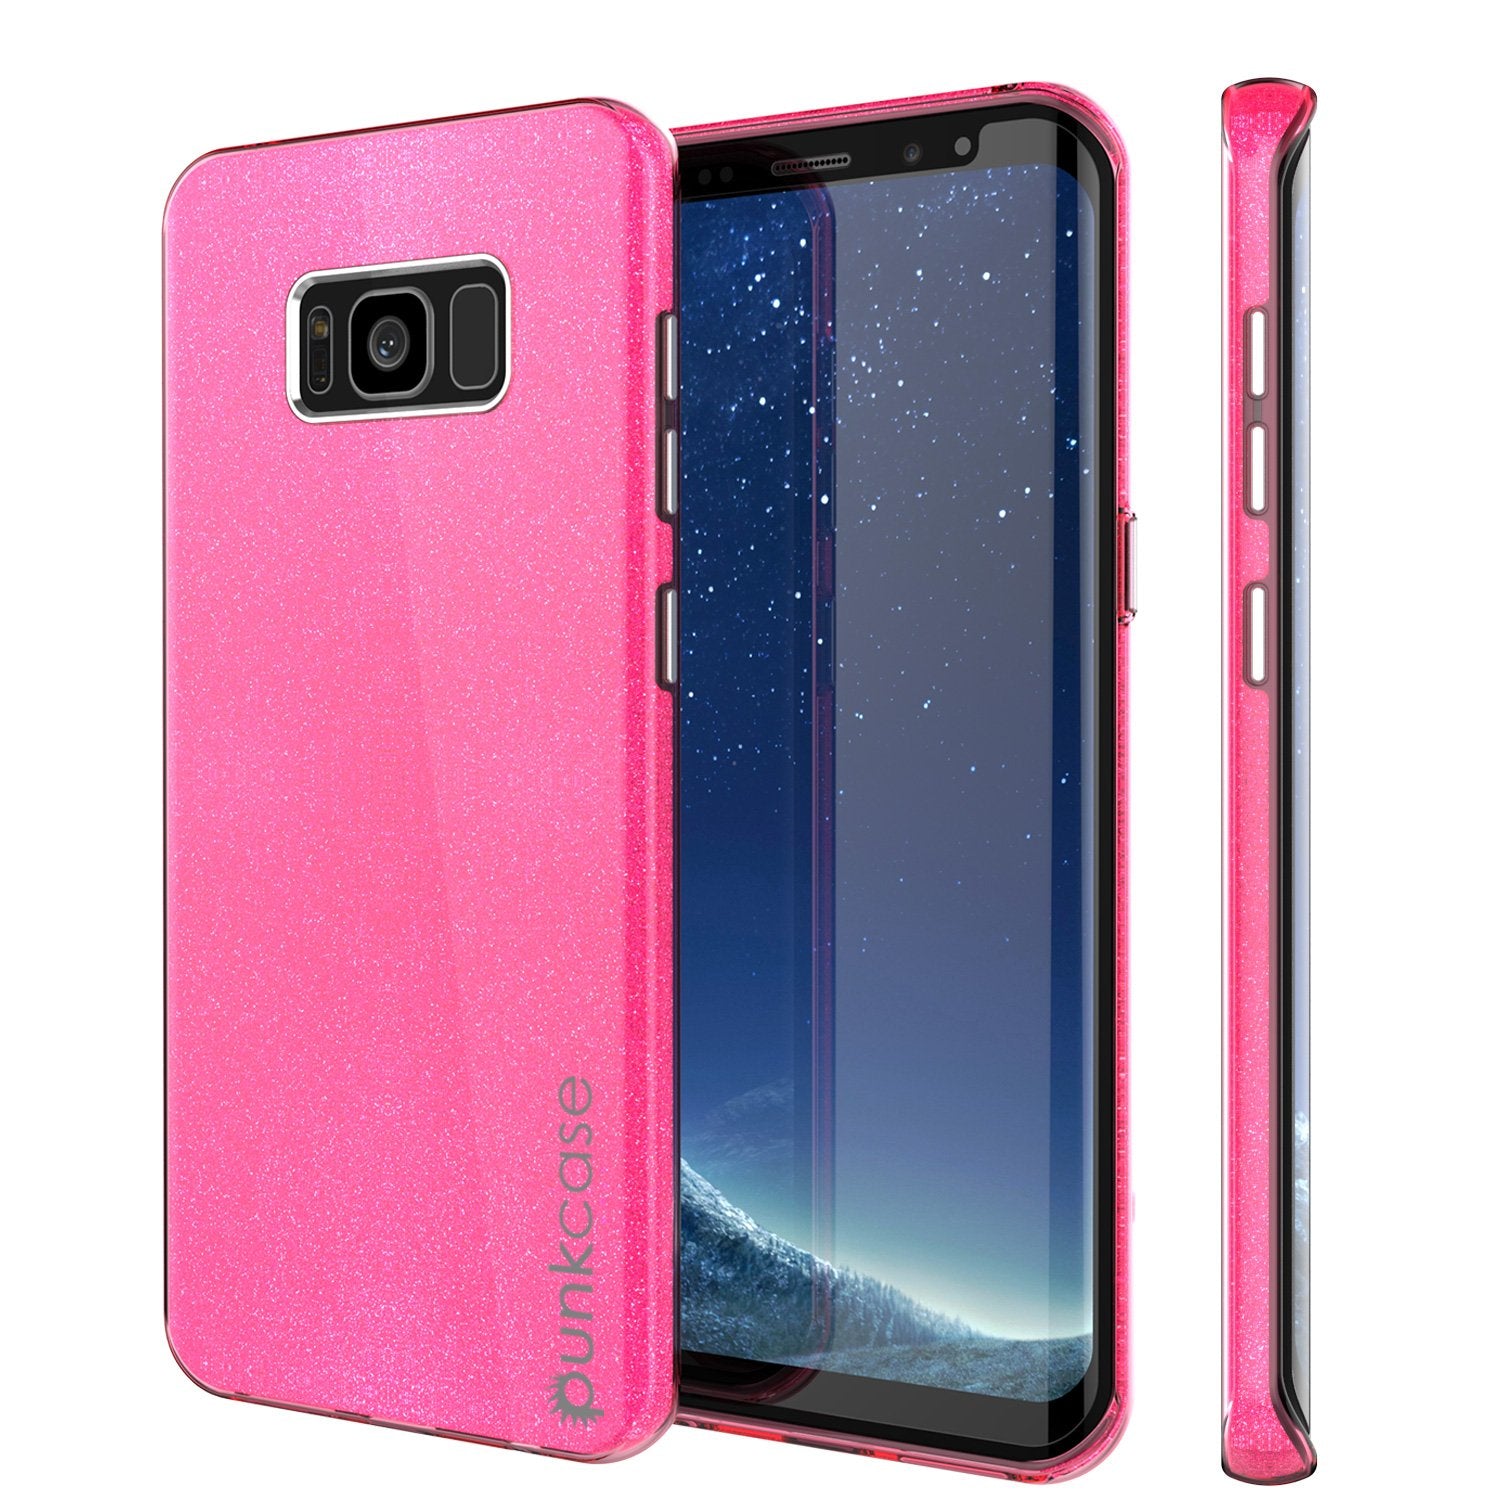 Galaxy S8 Plus Case, Punkcase Galactic 2.0 Series Ultra Slim Protective Armor TPU Cover [Pink]